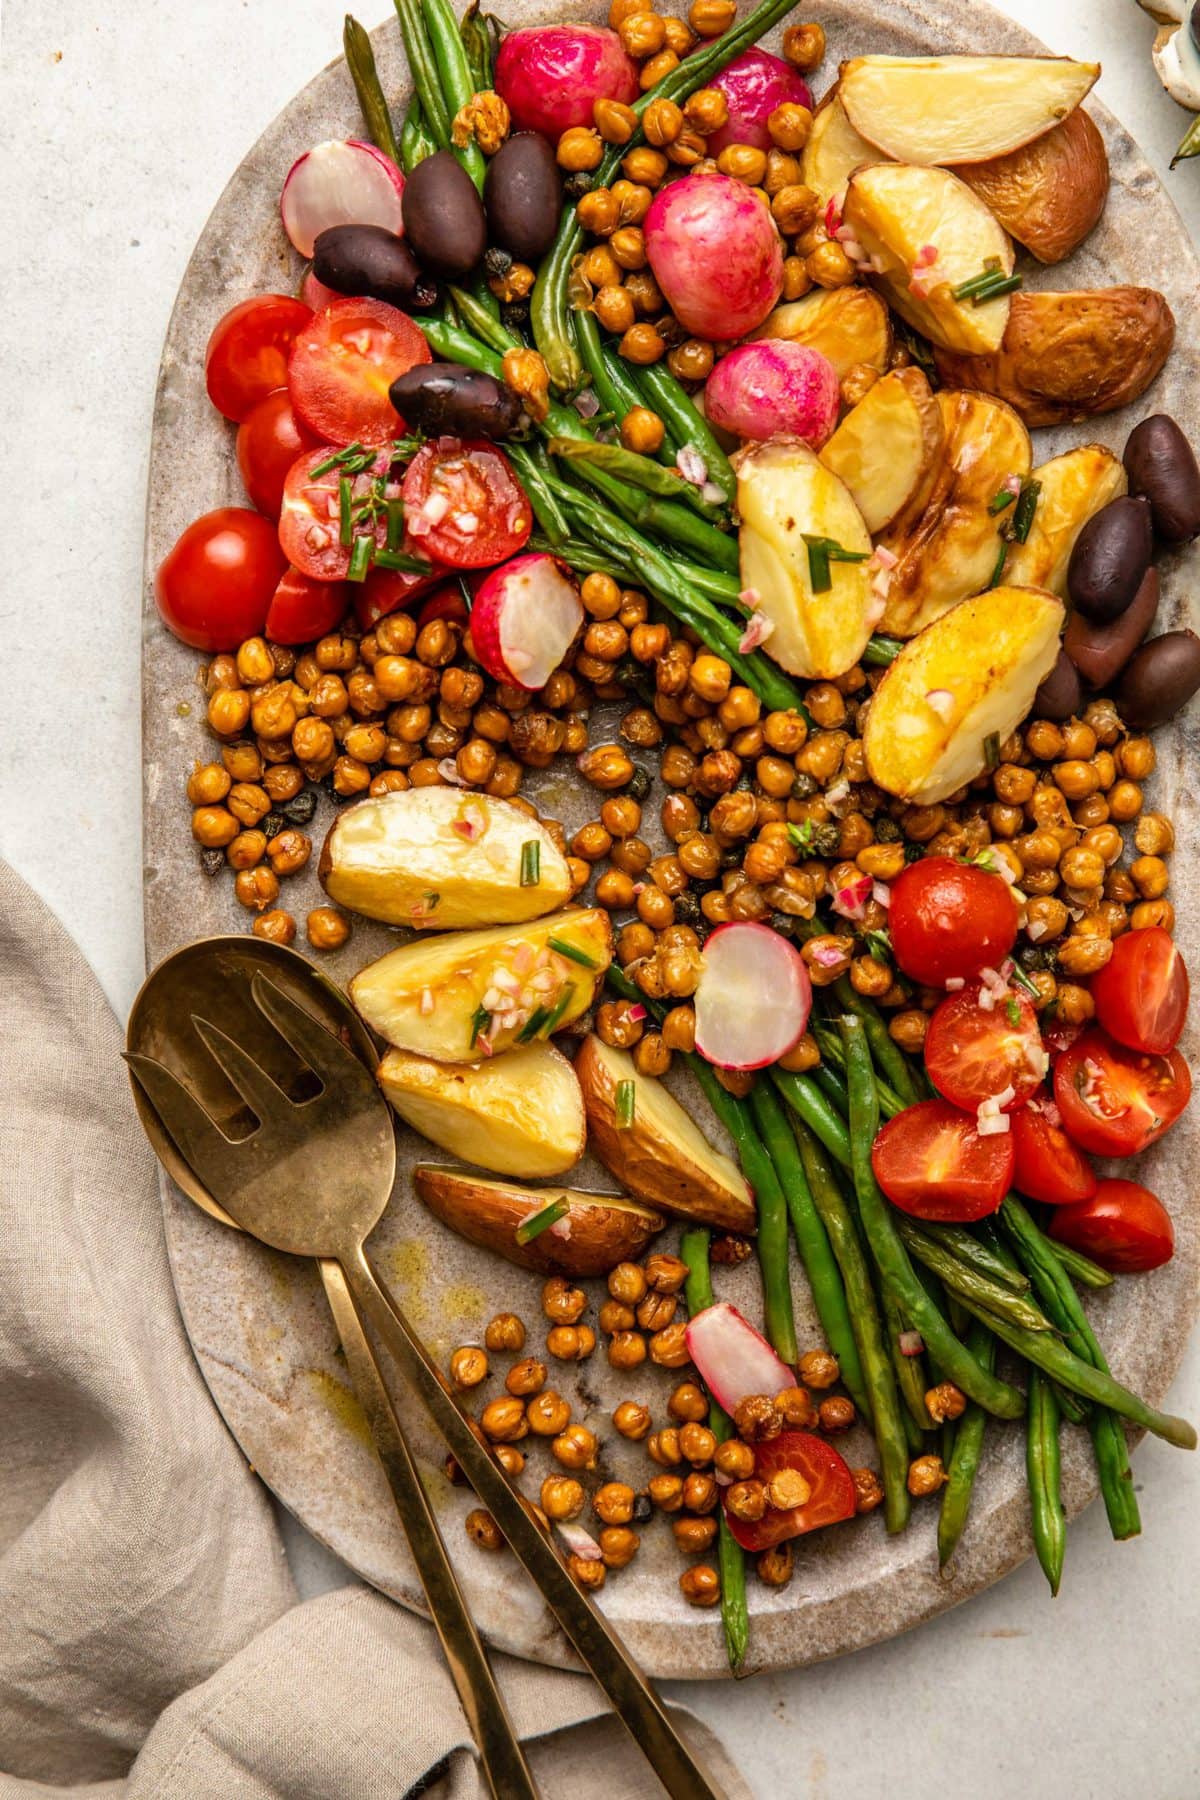 gold serveware on large stone tray. Roasted potatoes, green beans, radishes, tomatoes, olives, crispy chickpeas, and a dressing are on the stone tray